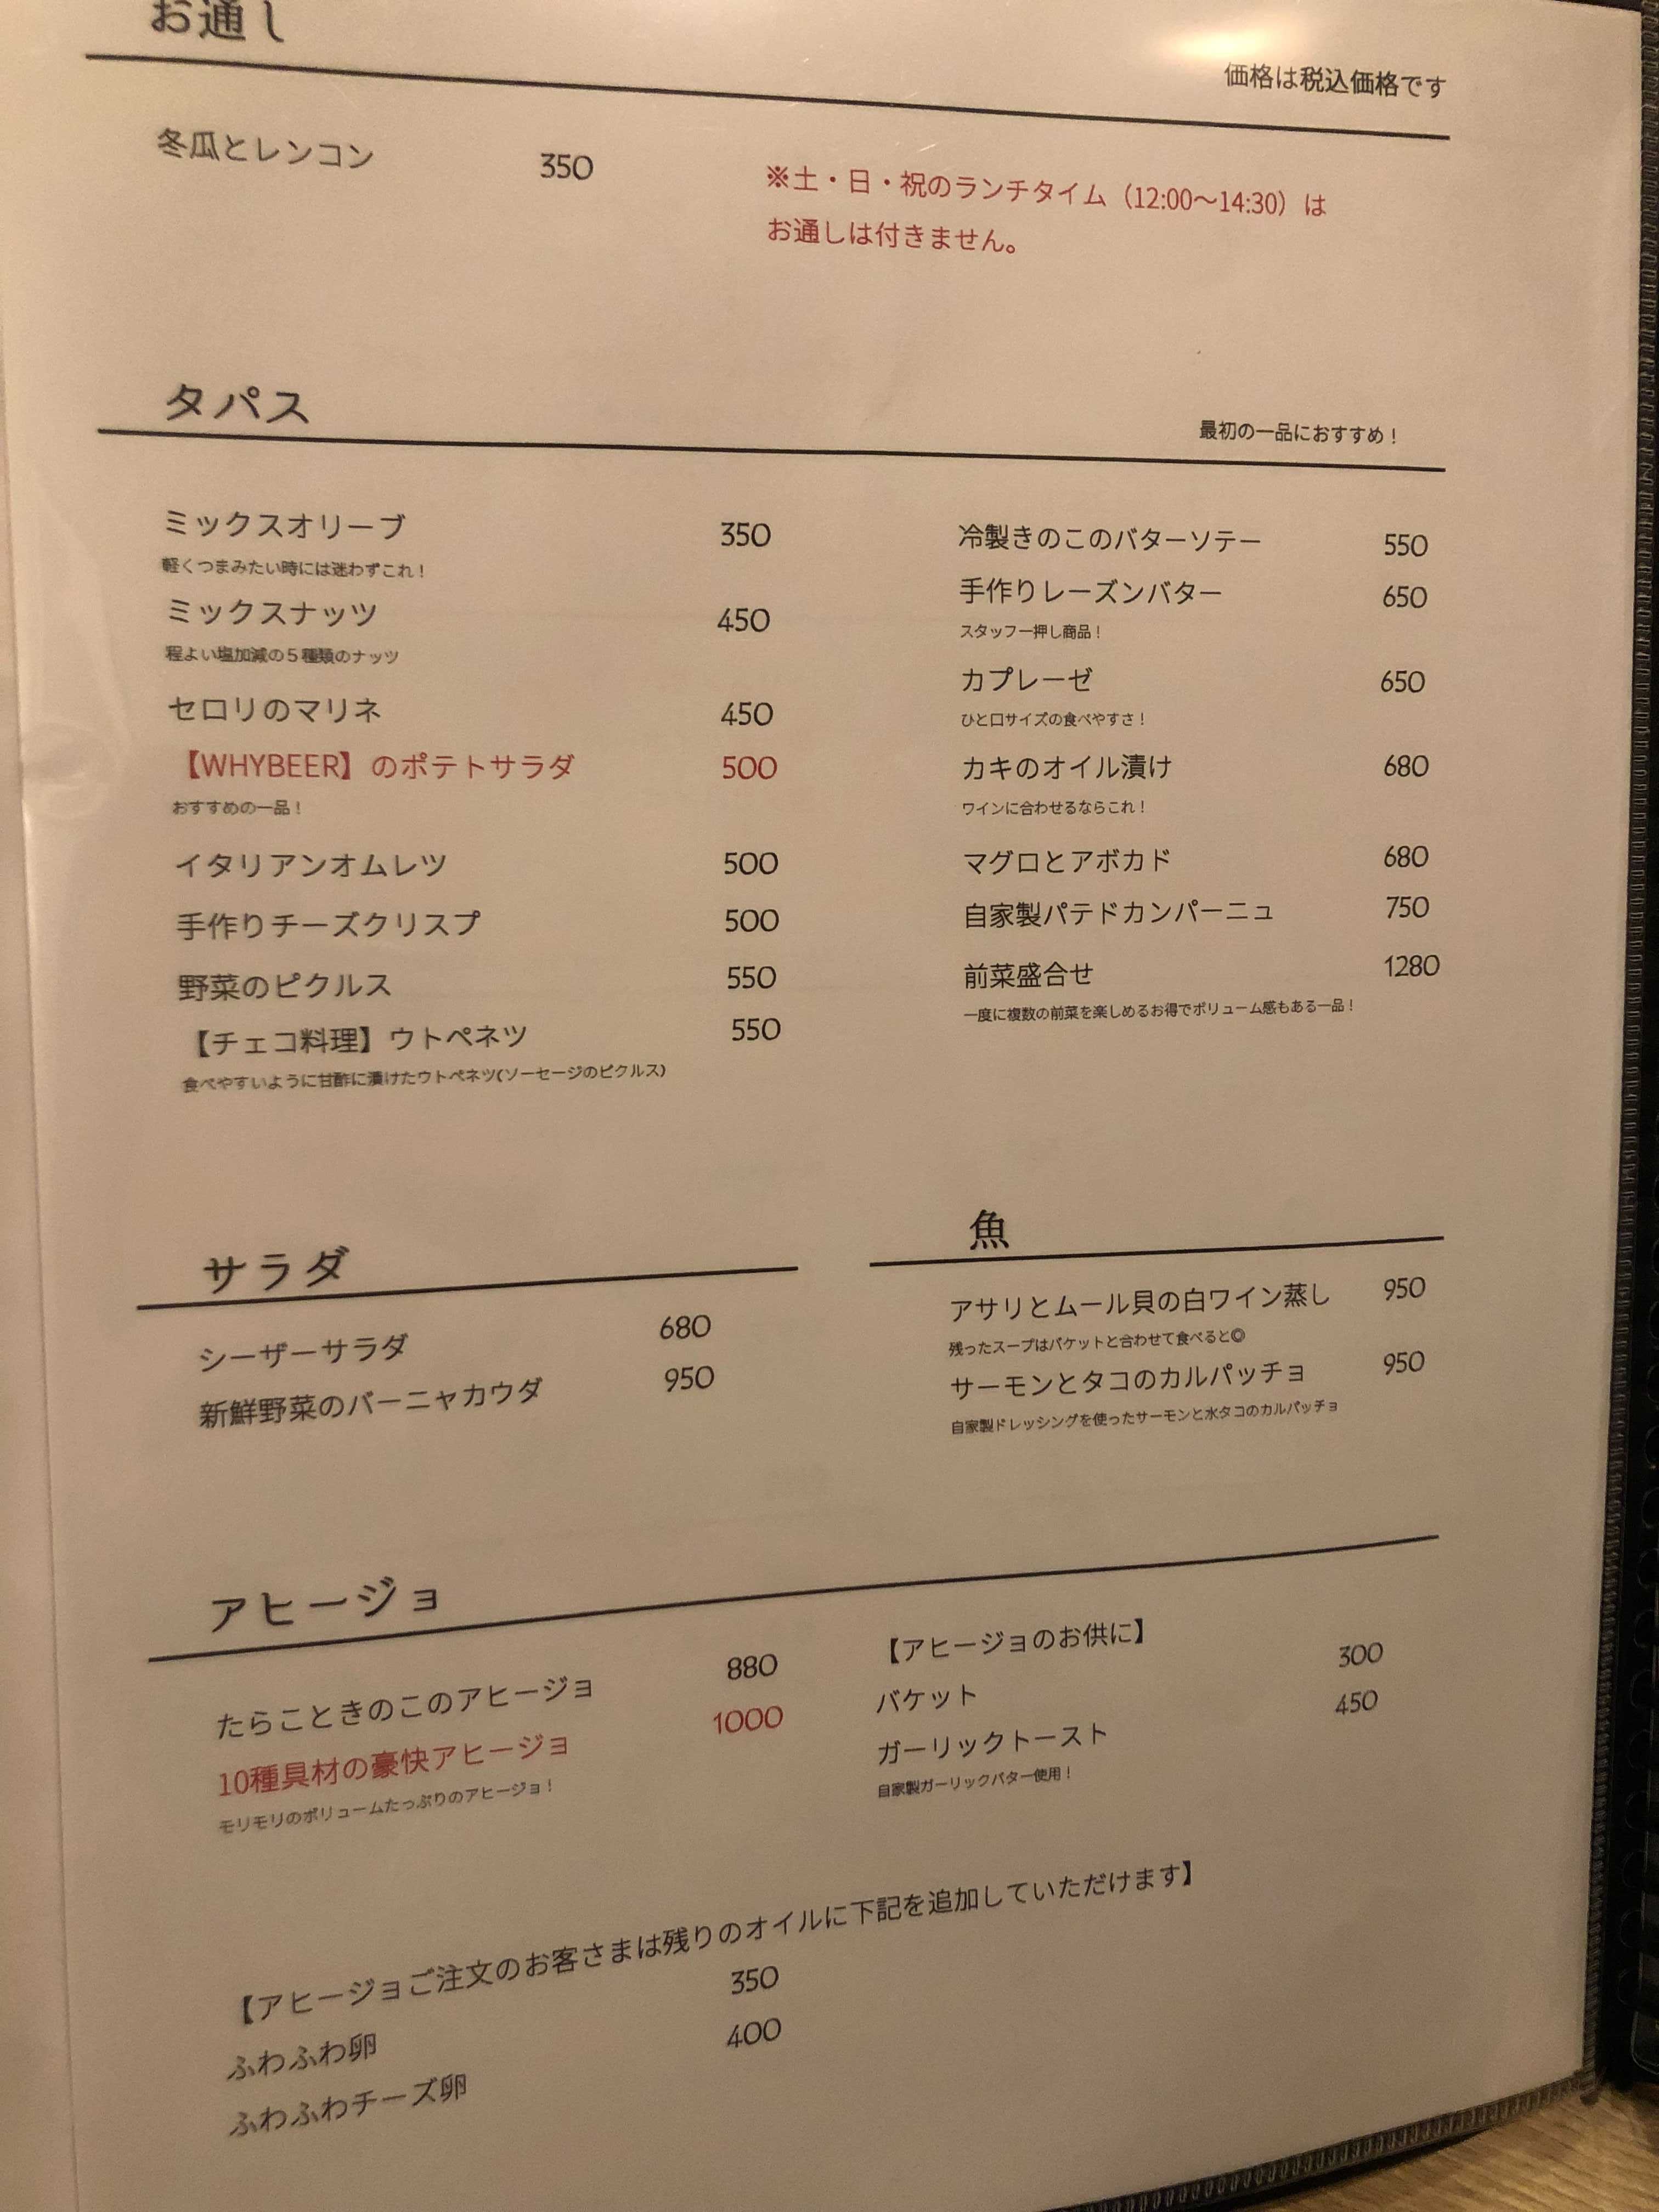 WHY BEER?のメニュー